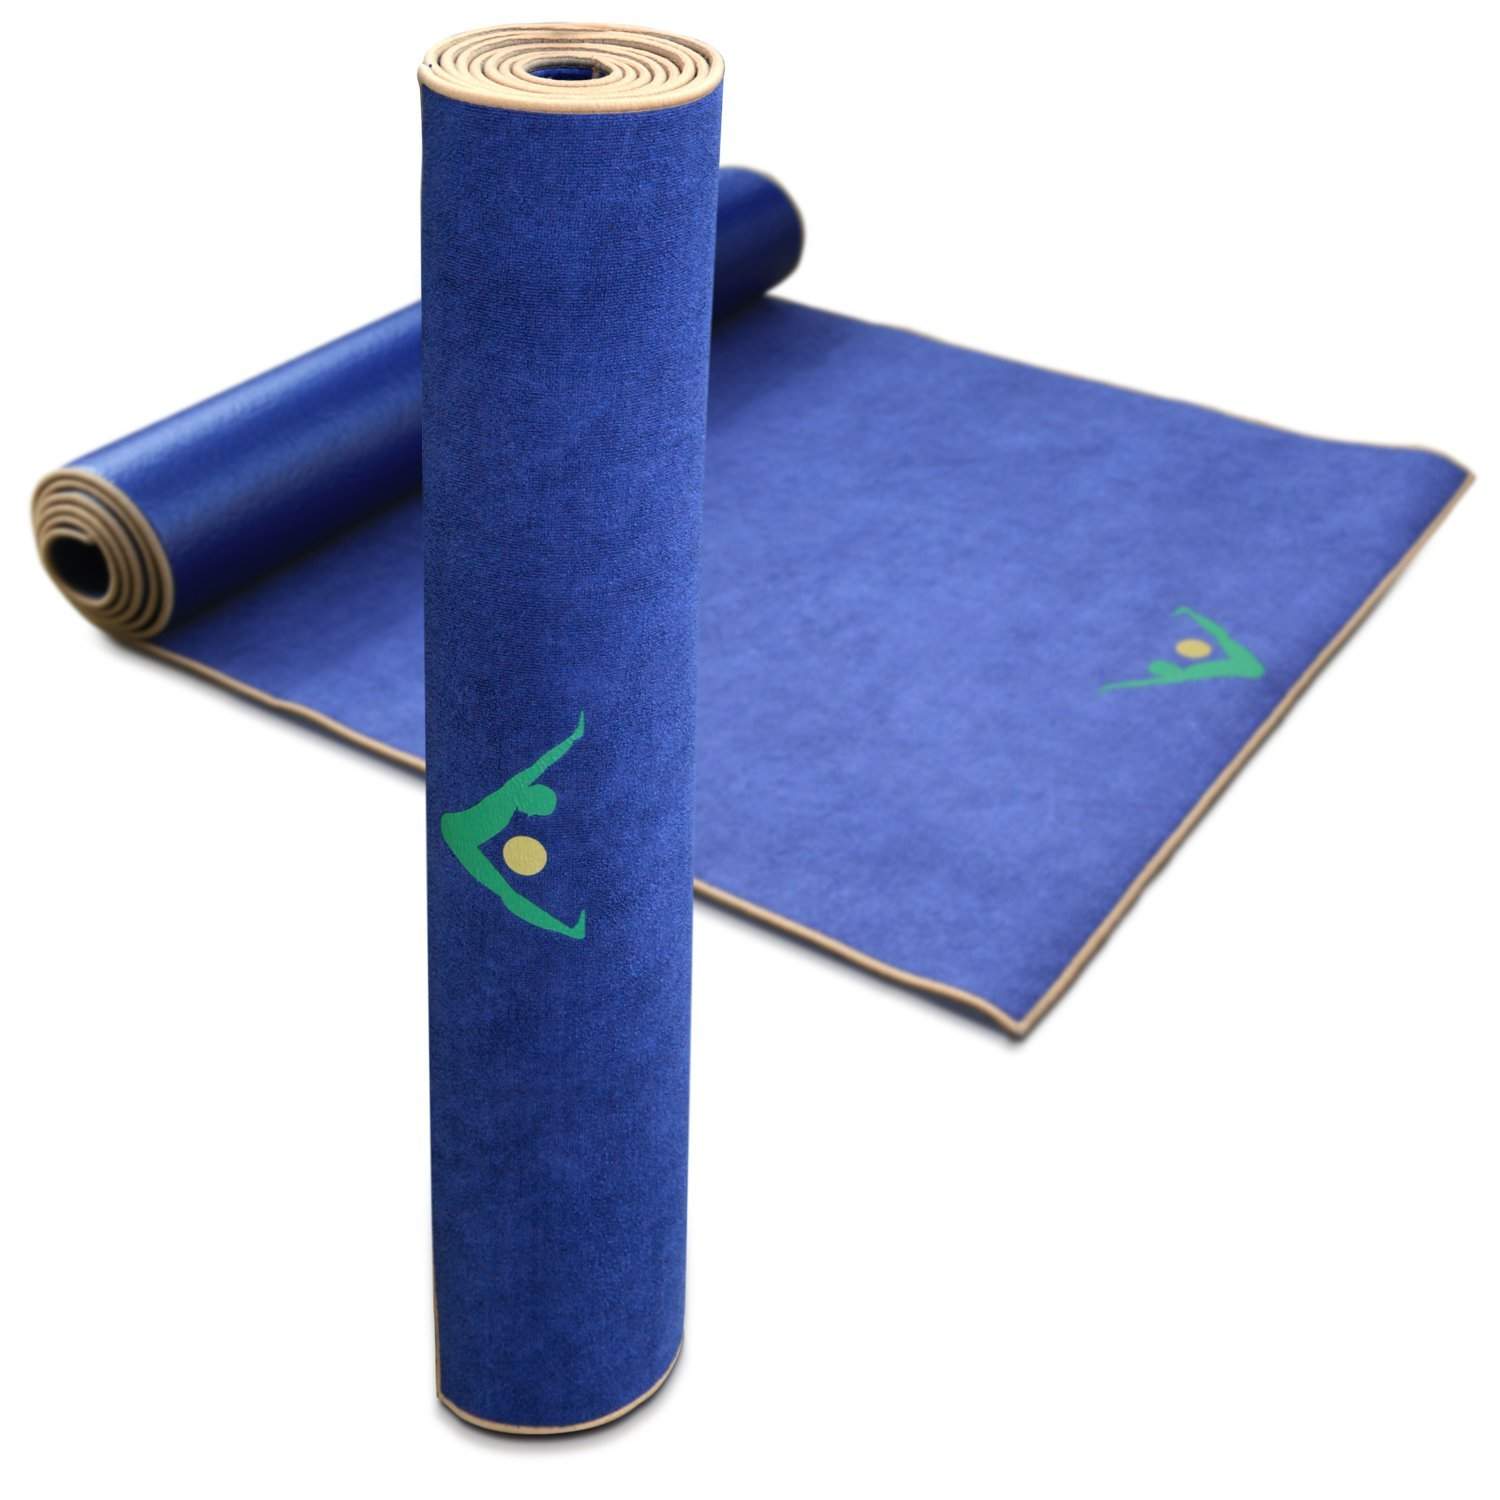 Best Yoga Mats Examined (& User Guide)